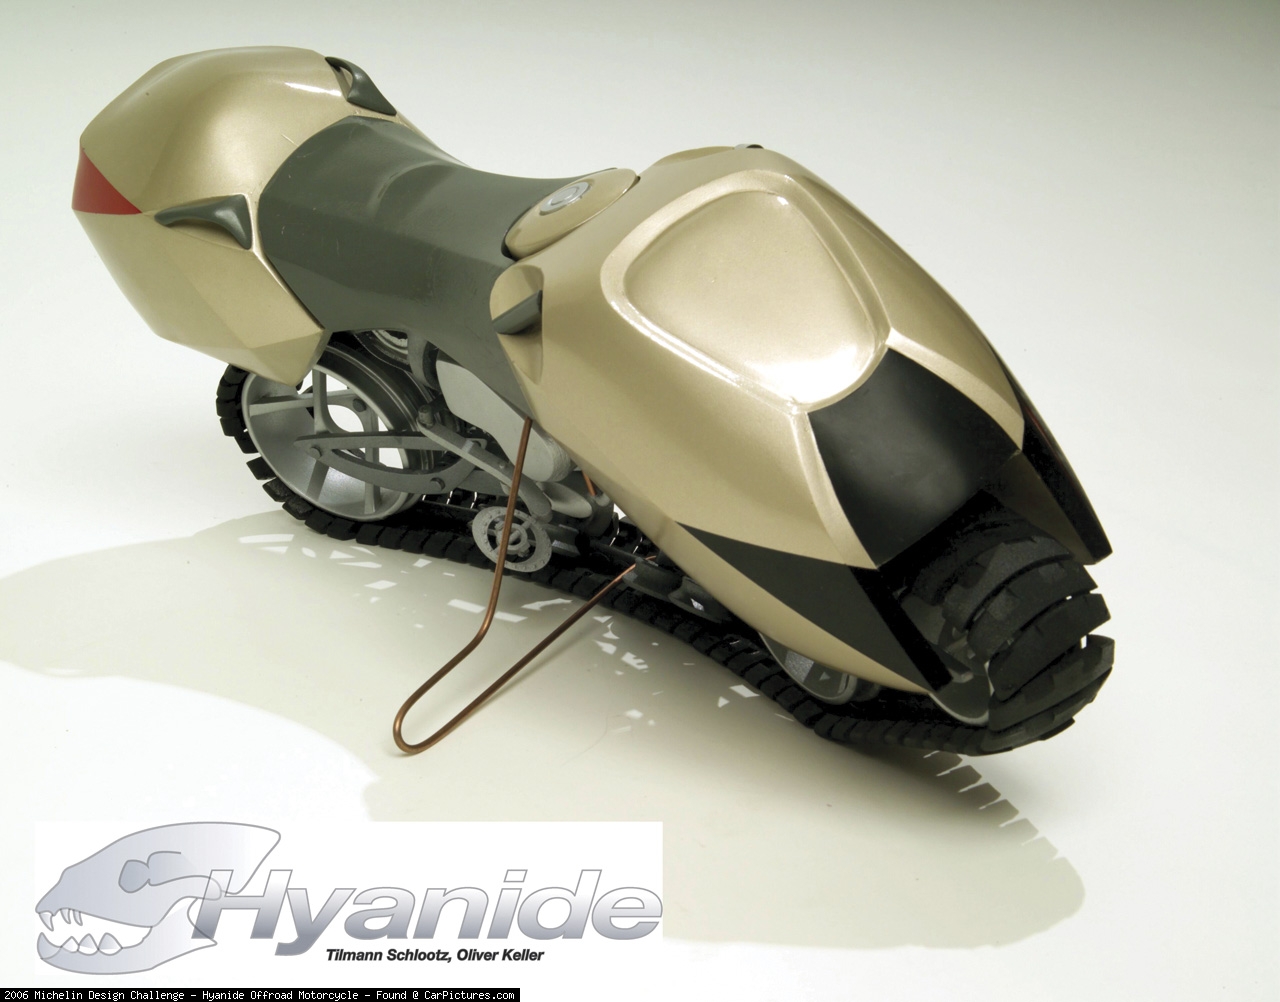 Michelin Design Hyanide Offroad Motorcycle photo 44652